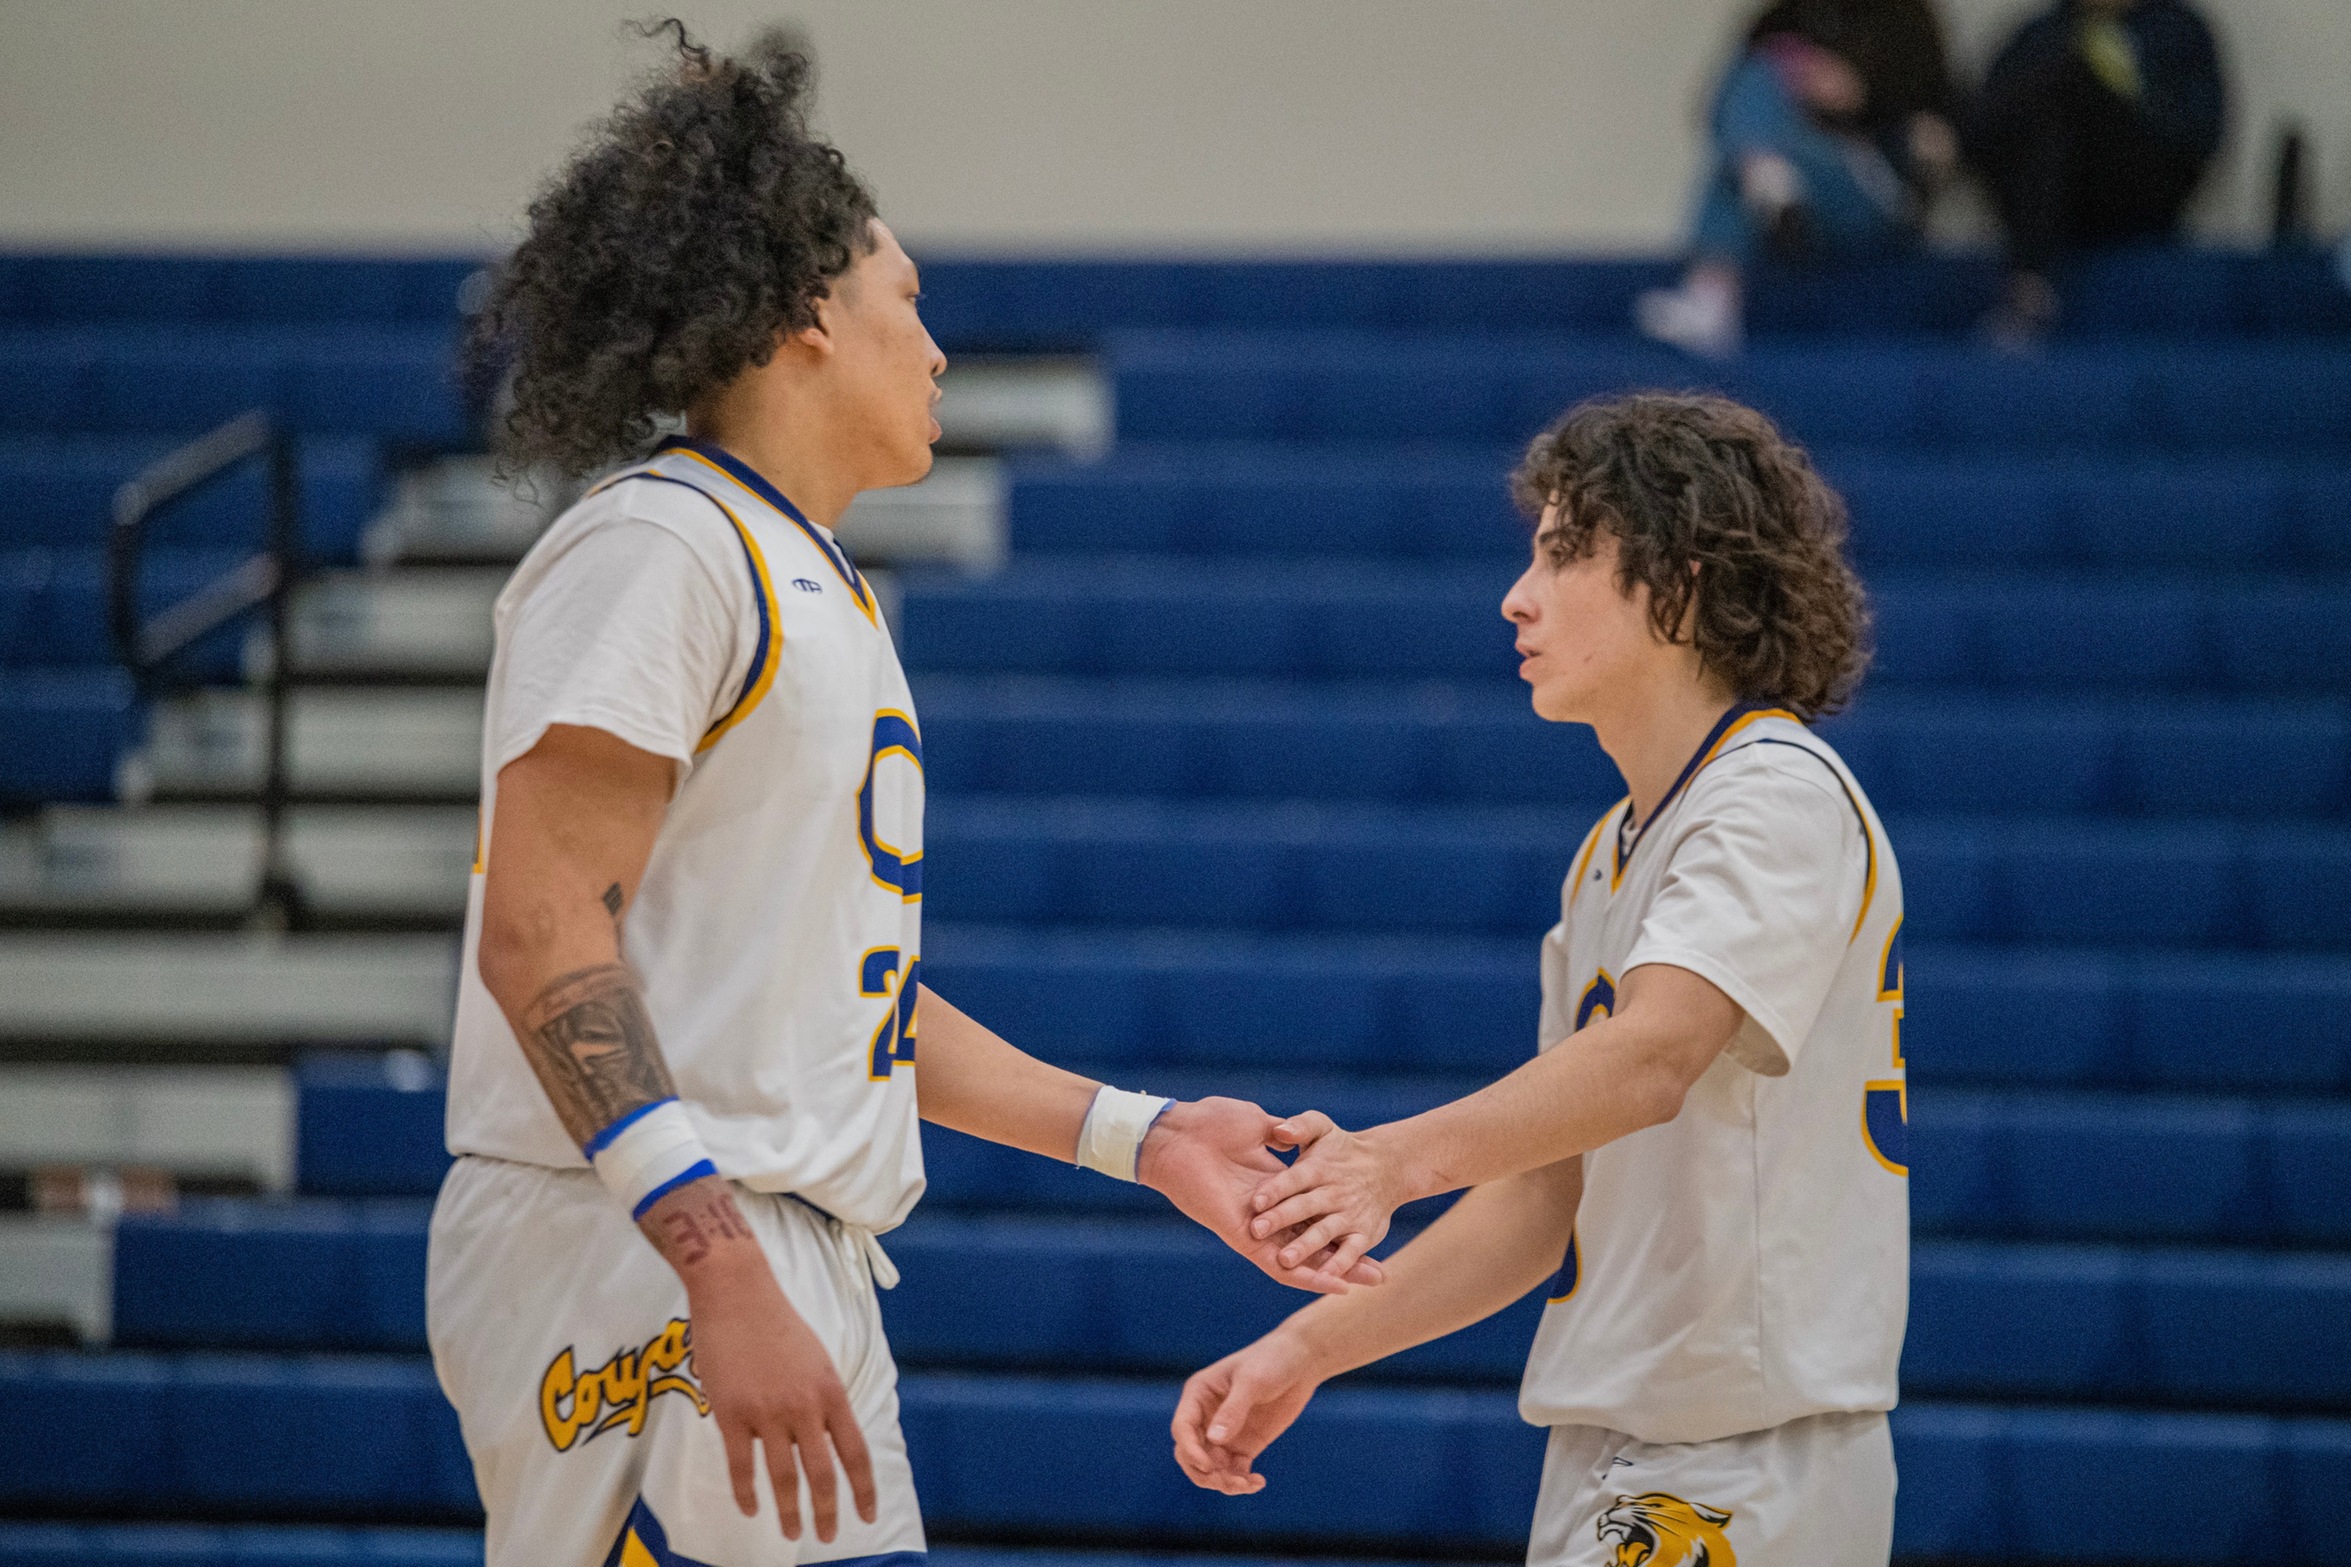 College of the Canyons men's basketball stock image.